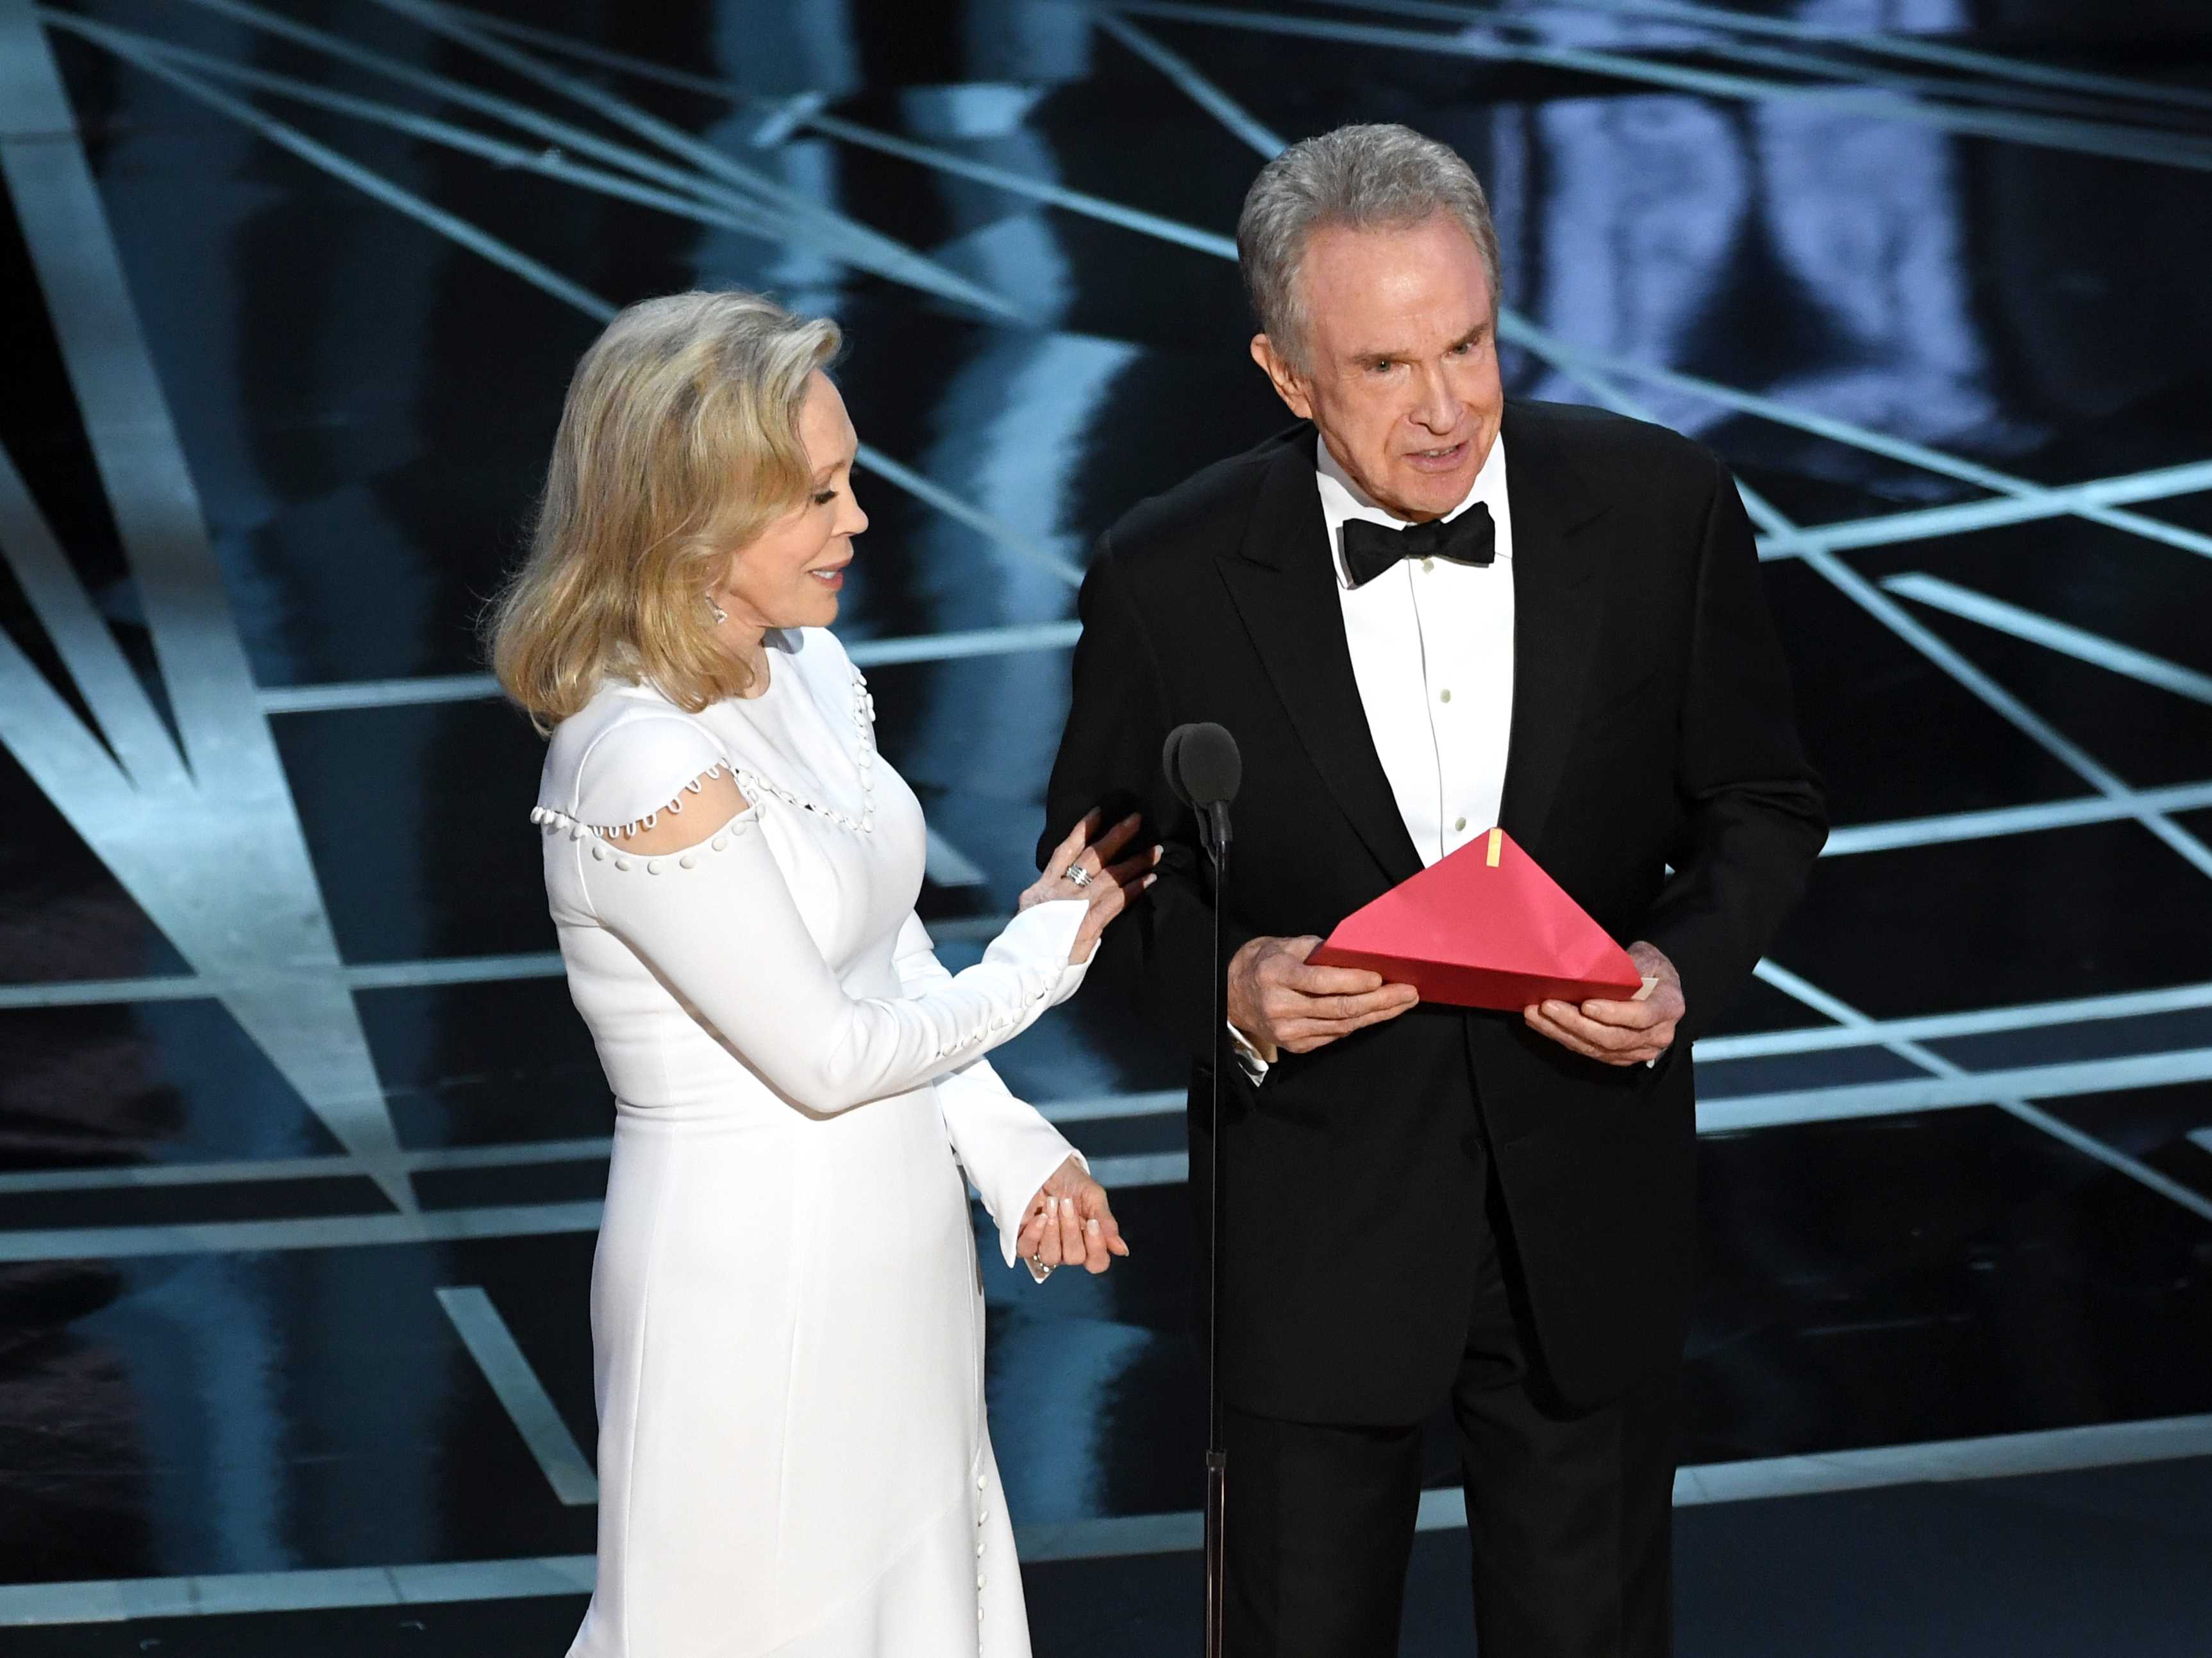 Warren Beatty and Faye Dunaway are presenting the Oscar for 'Best Picture' again this year